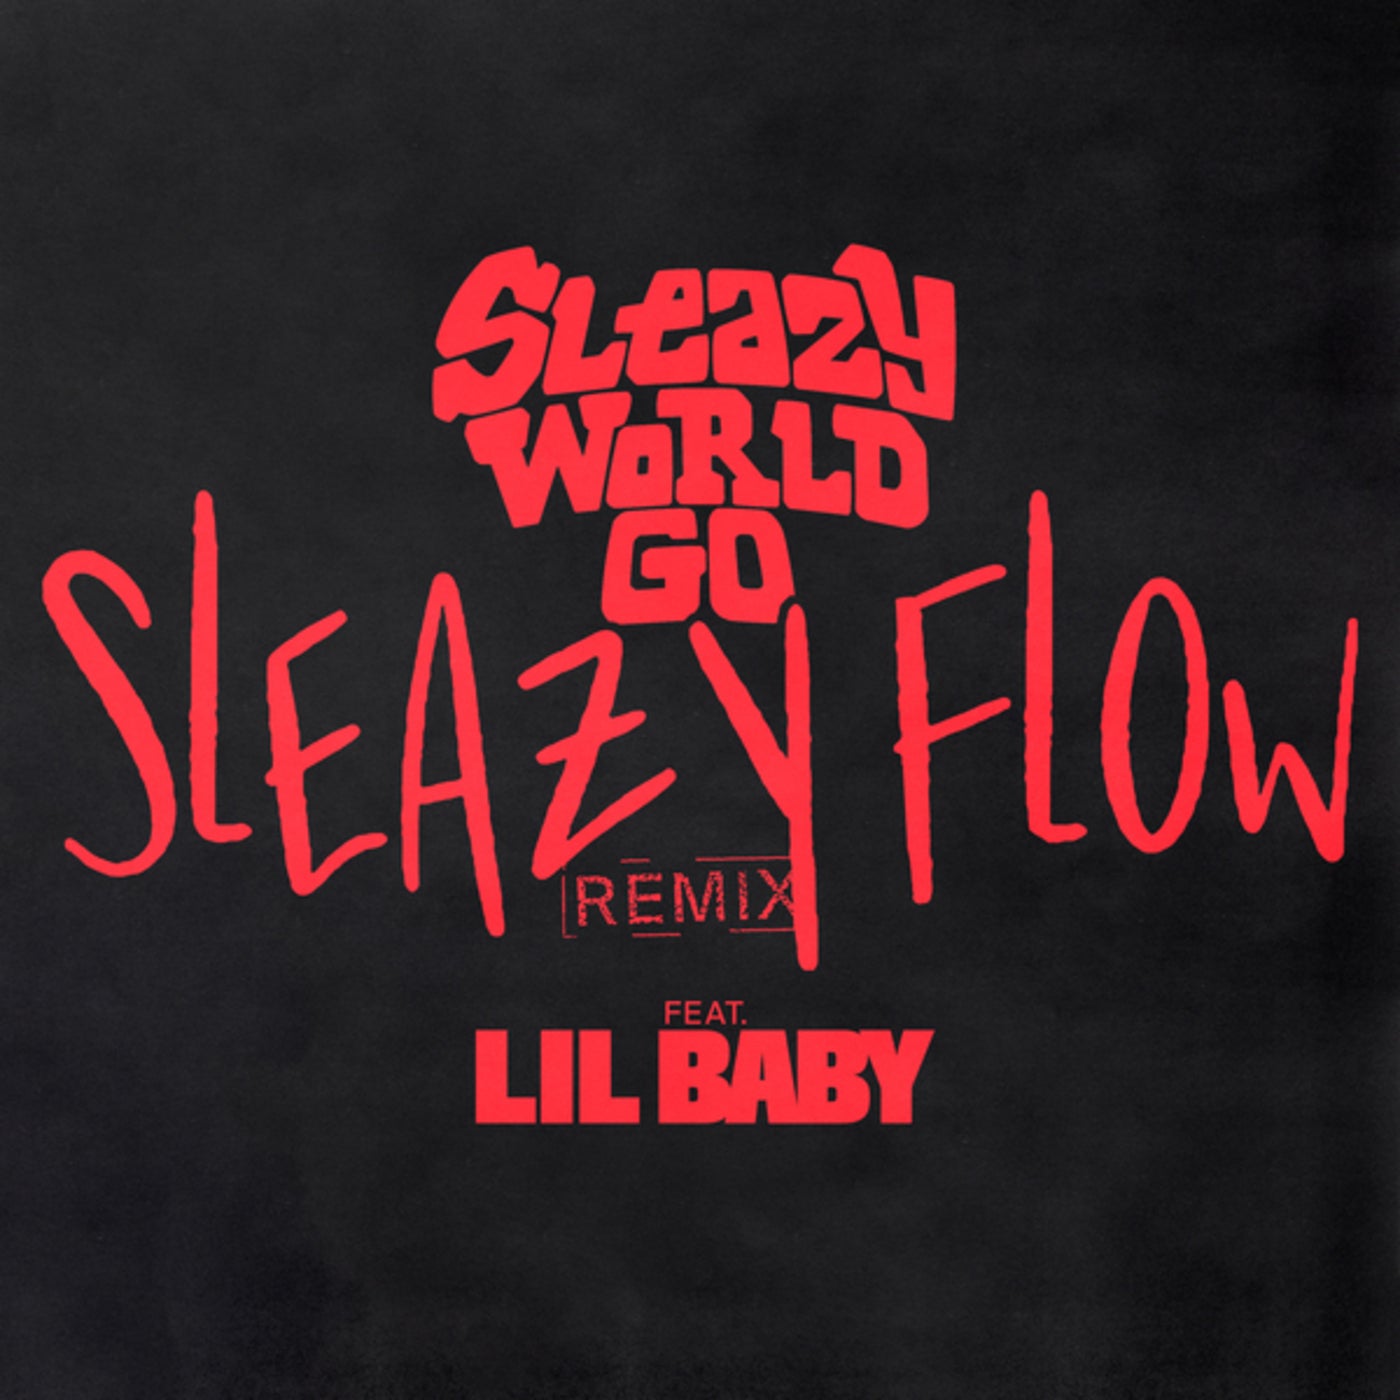 Sleazy Flow by Lil Baby and SleazyWorld Go on Beatsource